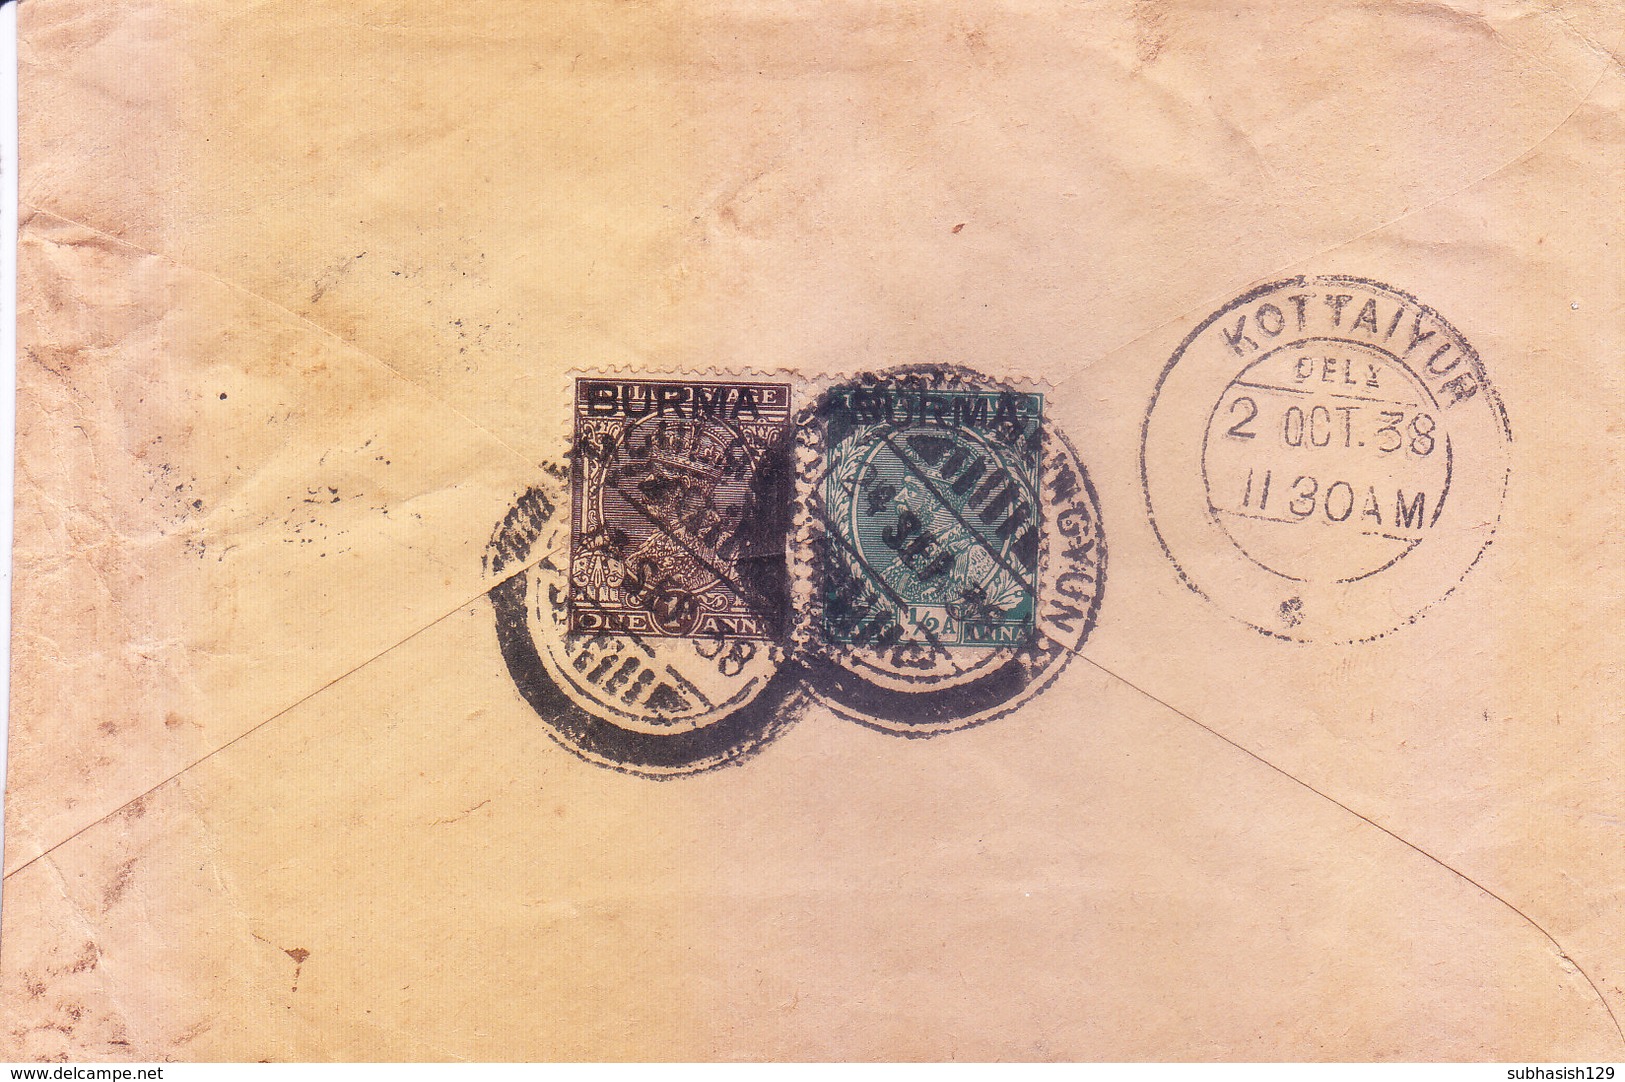 BURMA / MYANMAR - 1938 COMMERCIAL COVER SENT TO KOTTAIYUR WITH BASE CENSOR MARKING, INDIAN GEORGE V STAMPS USED IN BURMA - Burma (...-1947)